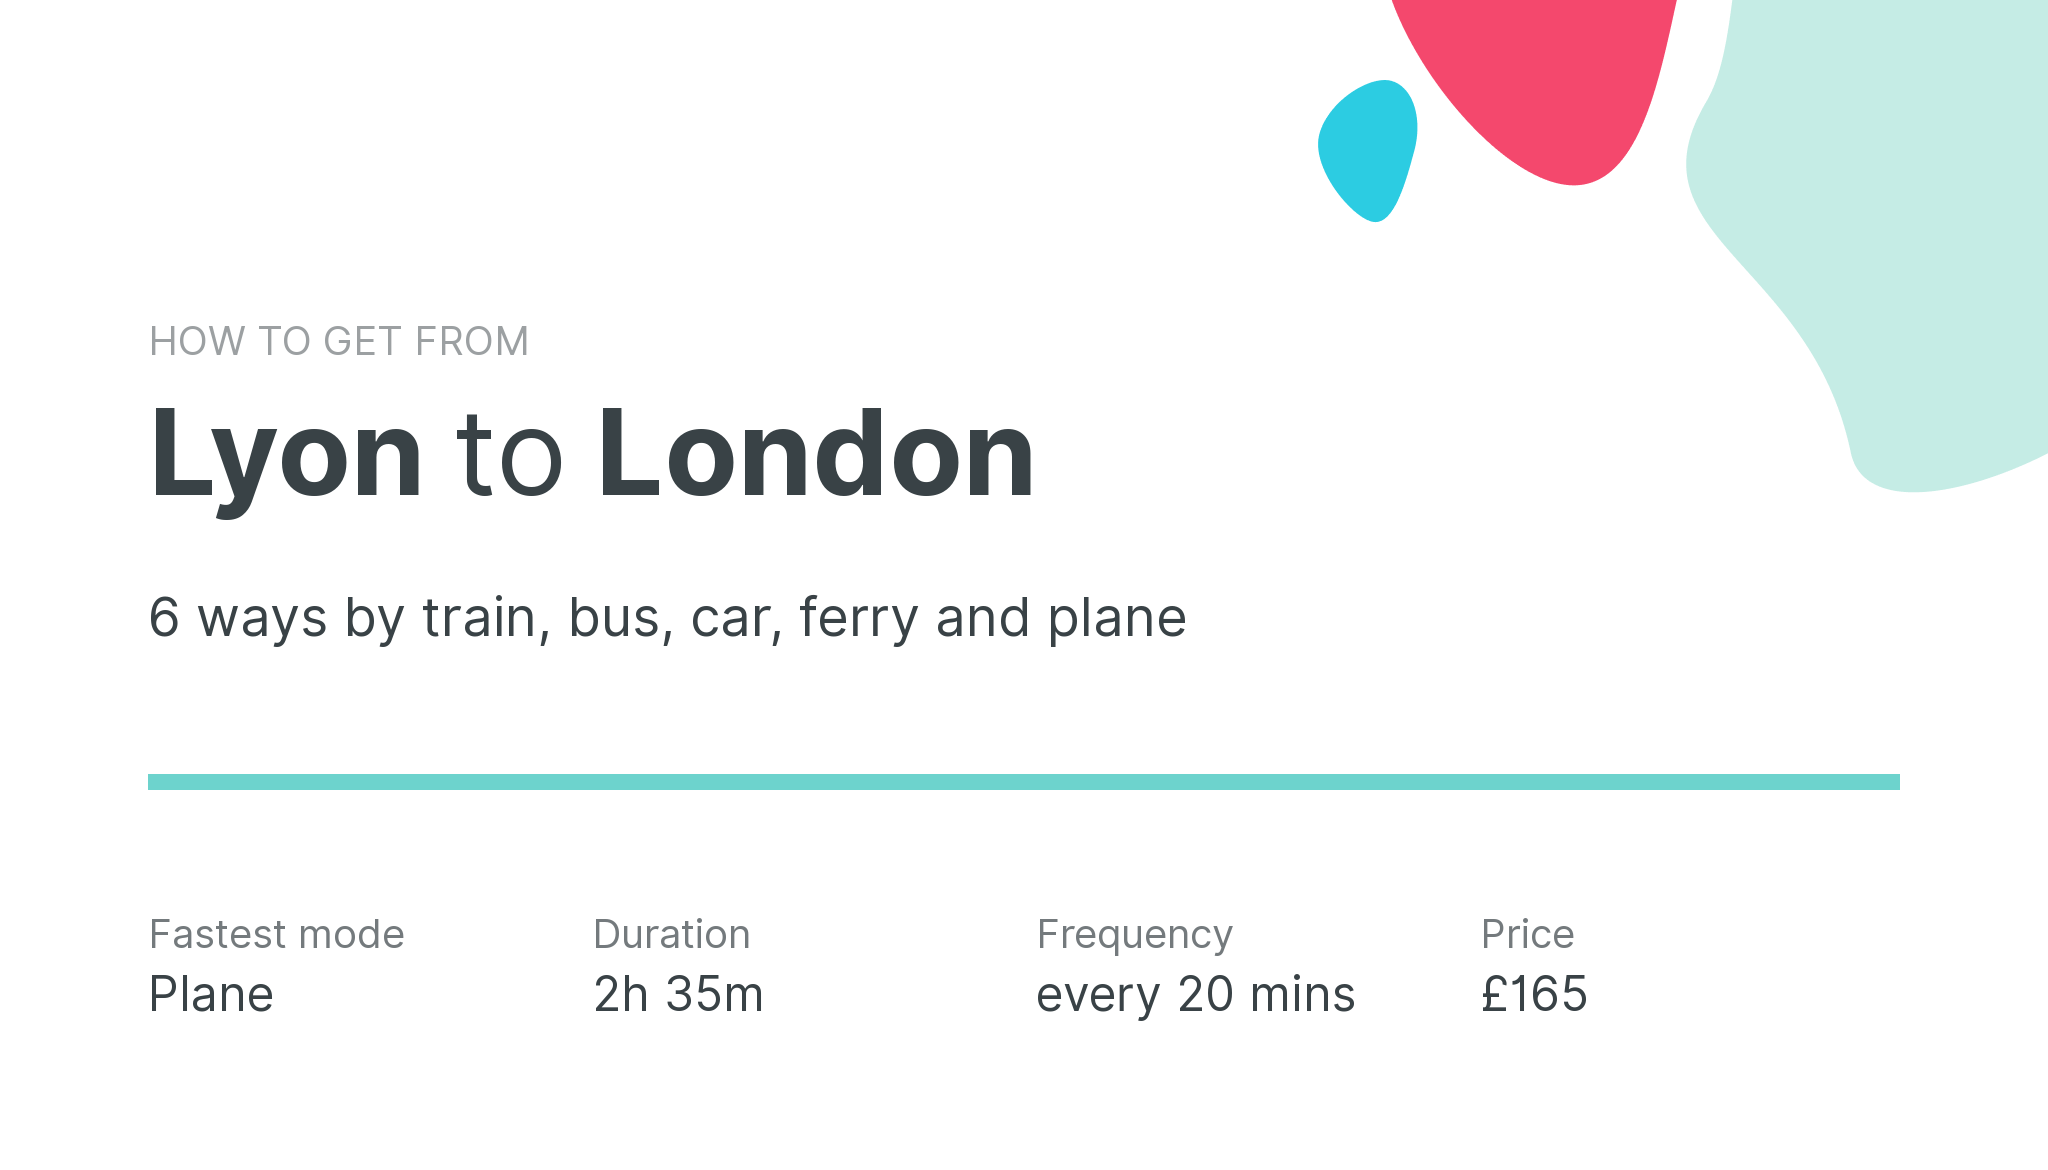 How do I get from Lyon to London